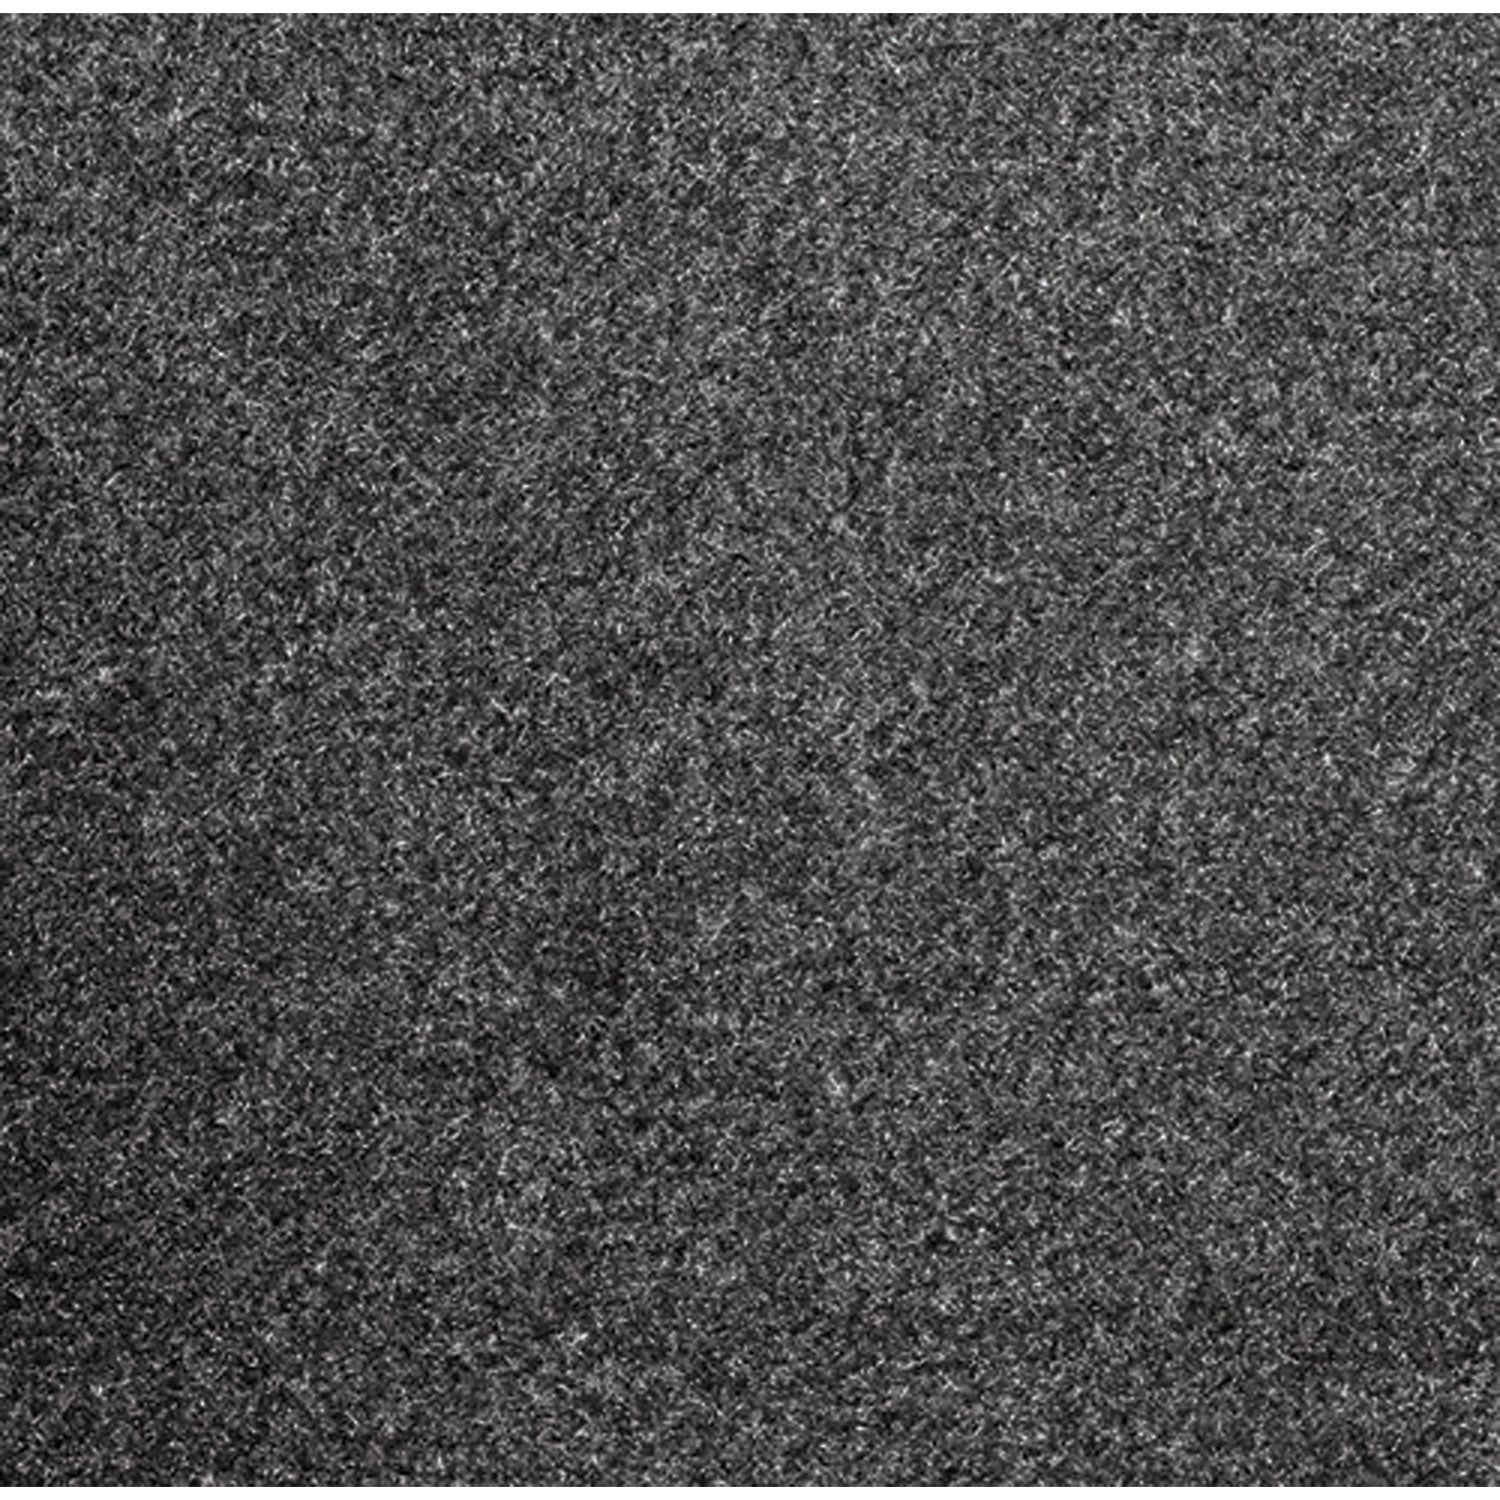 Rely-On Olefin Indoor Wiper Mat, 36 x 120, Charcoal - 4